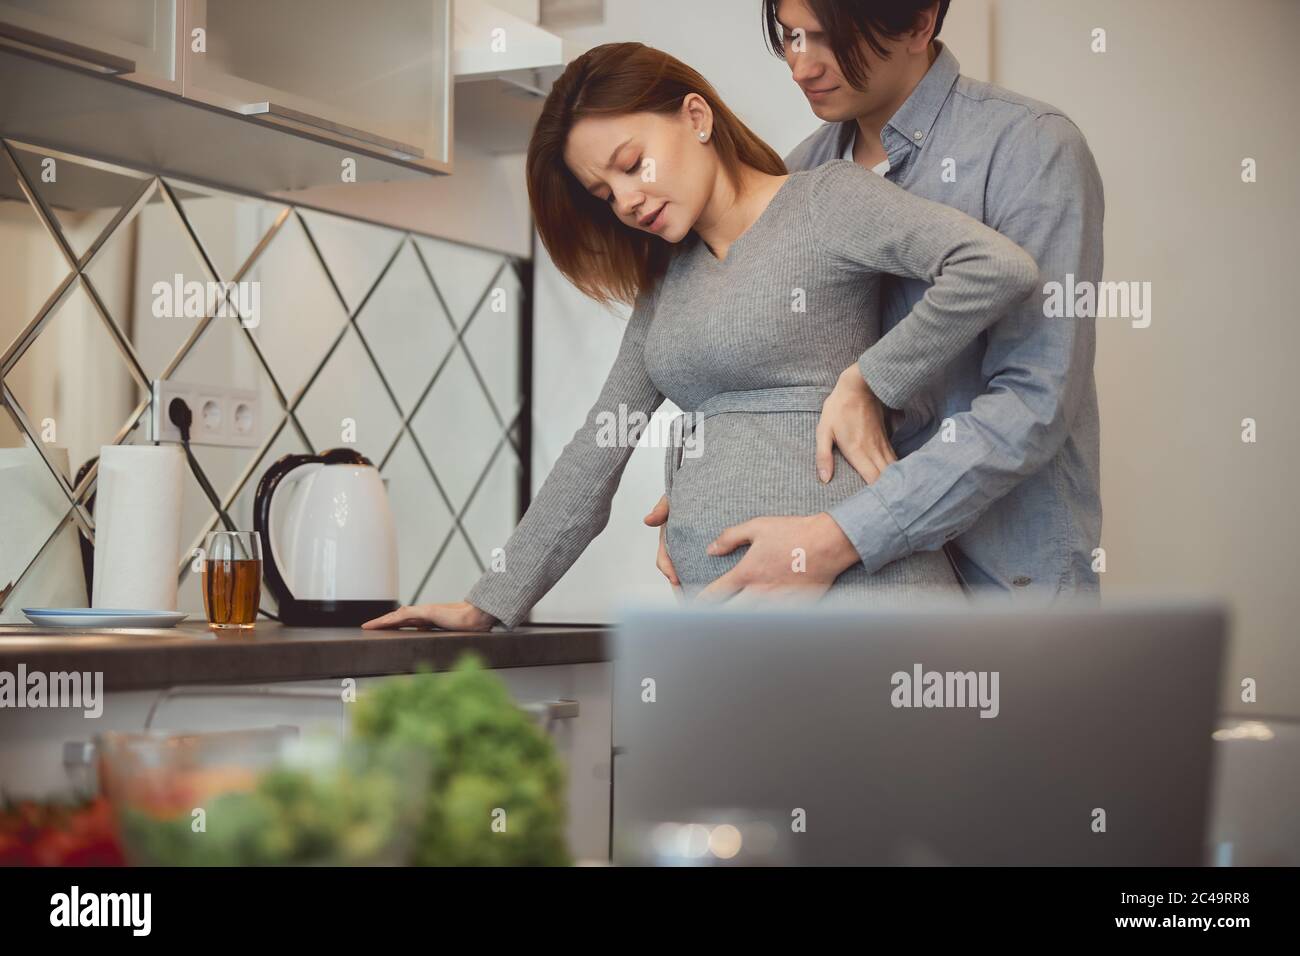 Relieving pain during the contractions at home with gentle touch Stock Photo